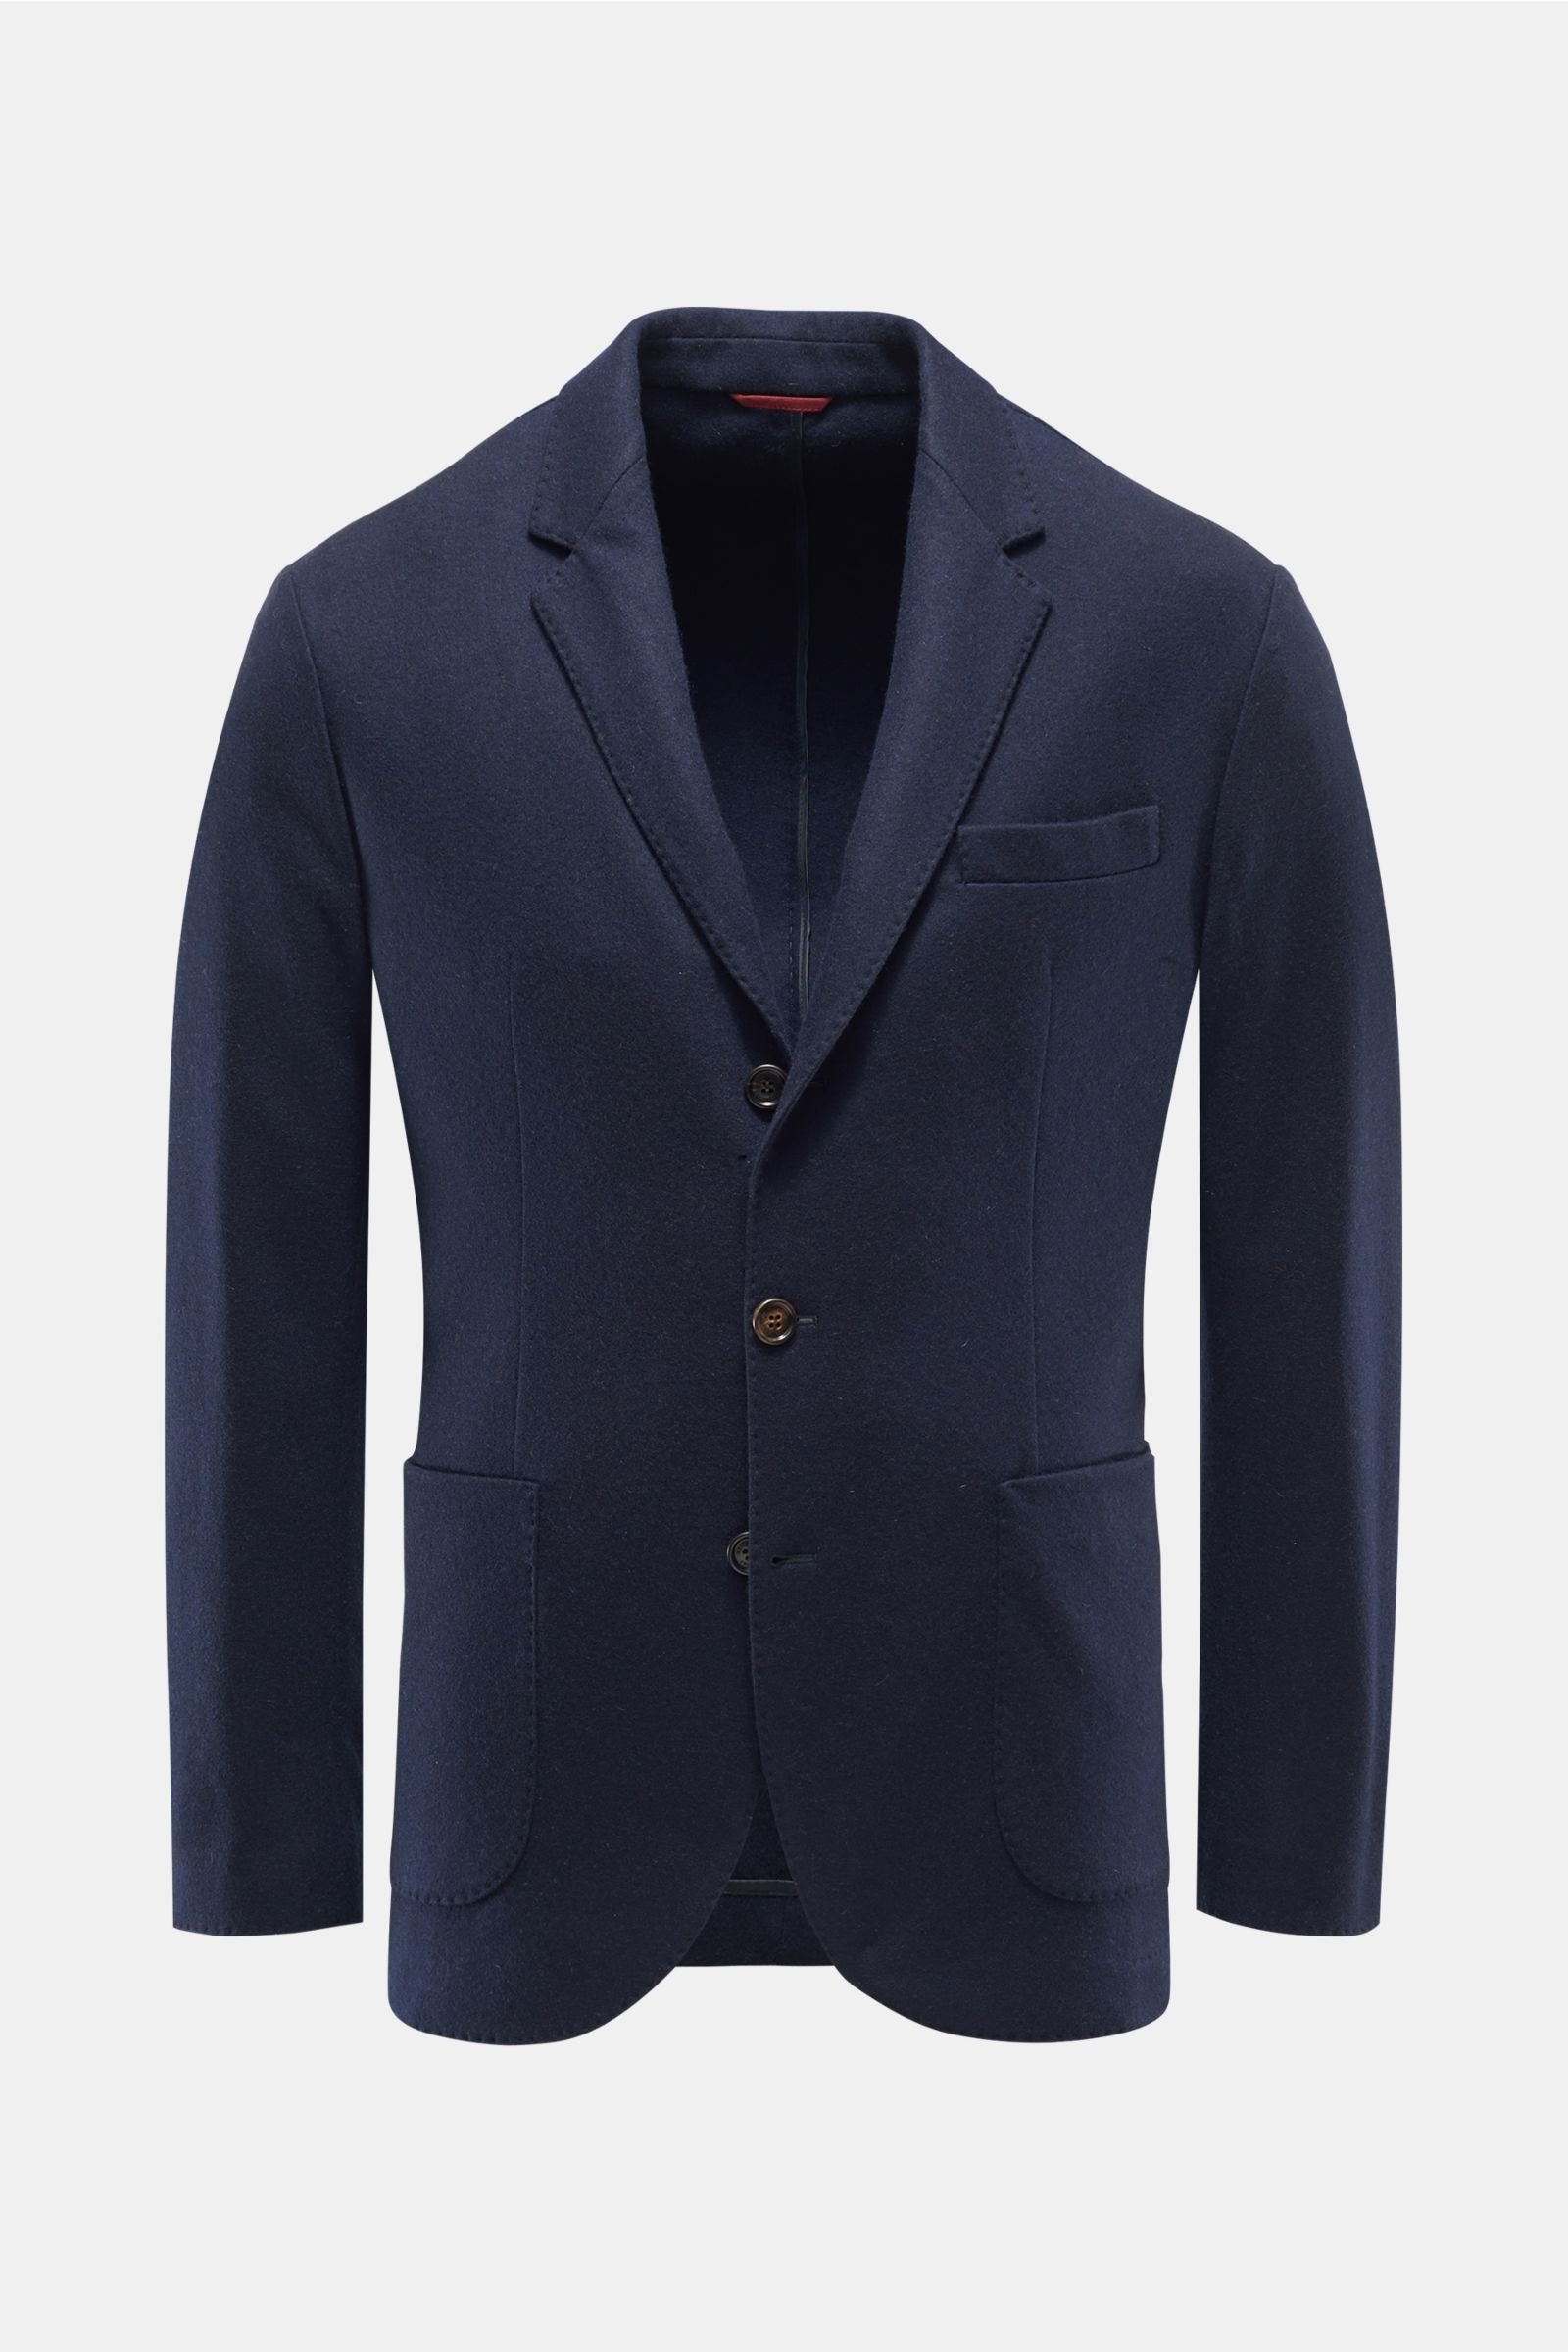 Cashmere jersey smart-casual jacket navy